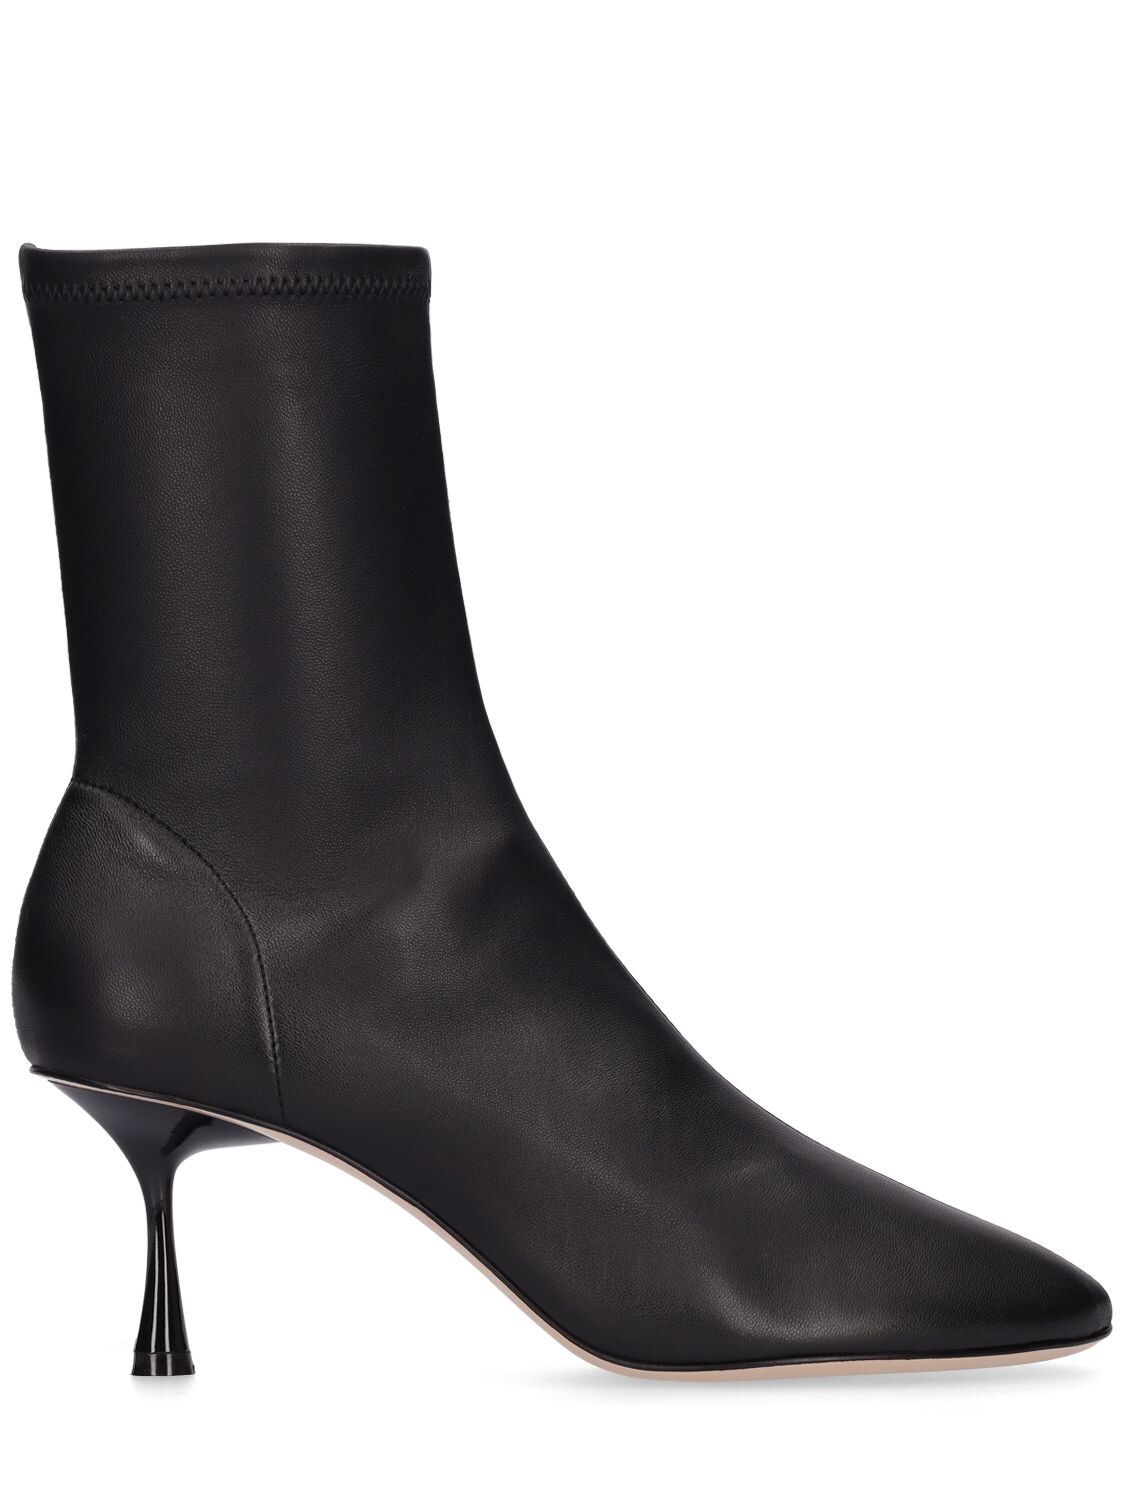 STUDIO AMELIA 70MM SPIRE LEATHER ANKLE BOOTS